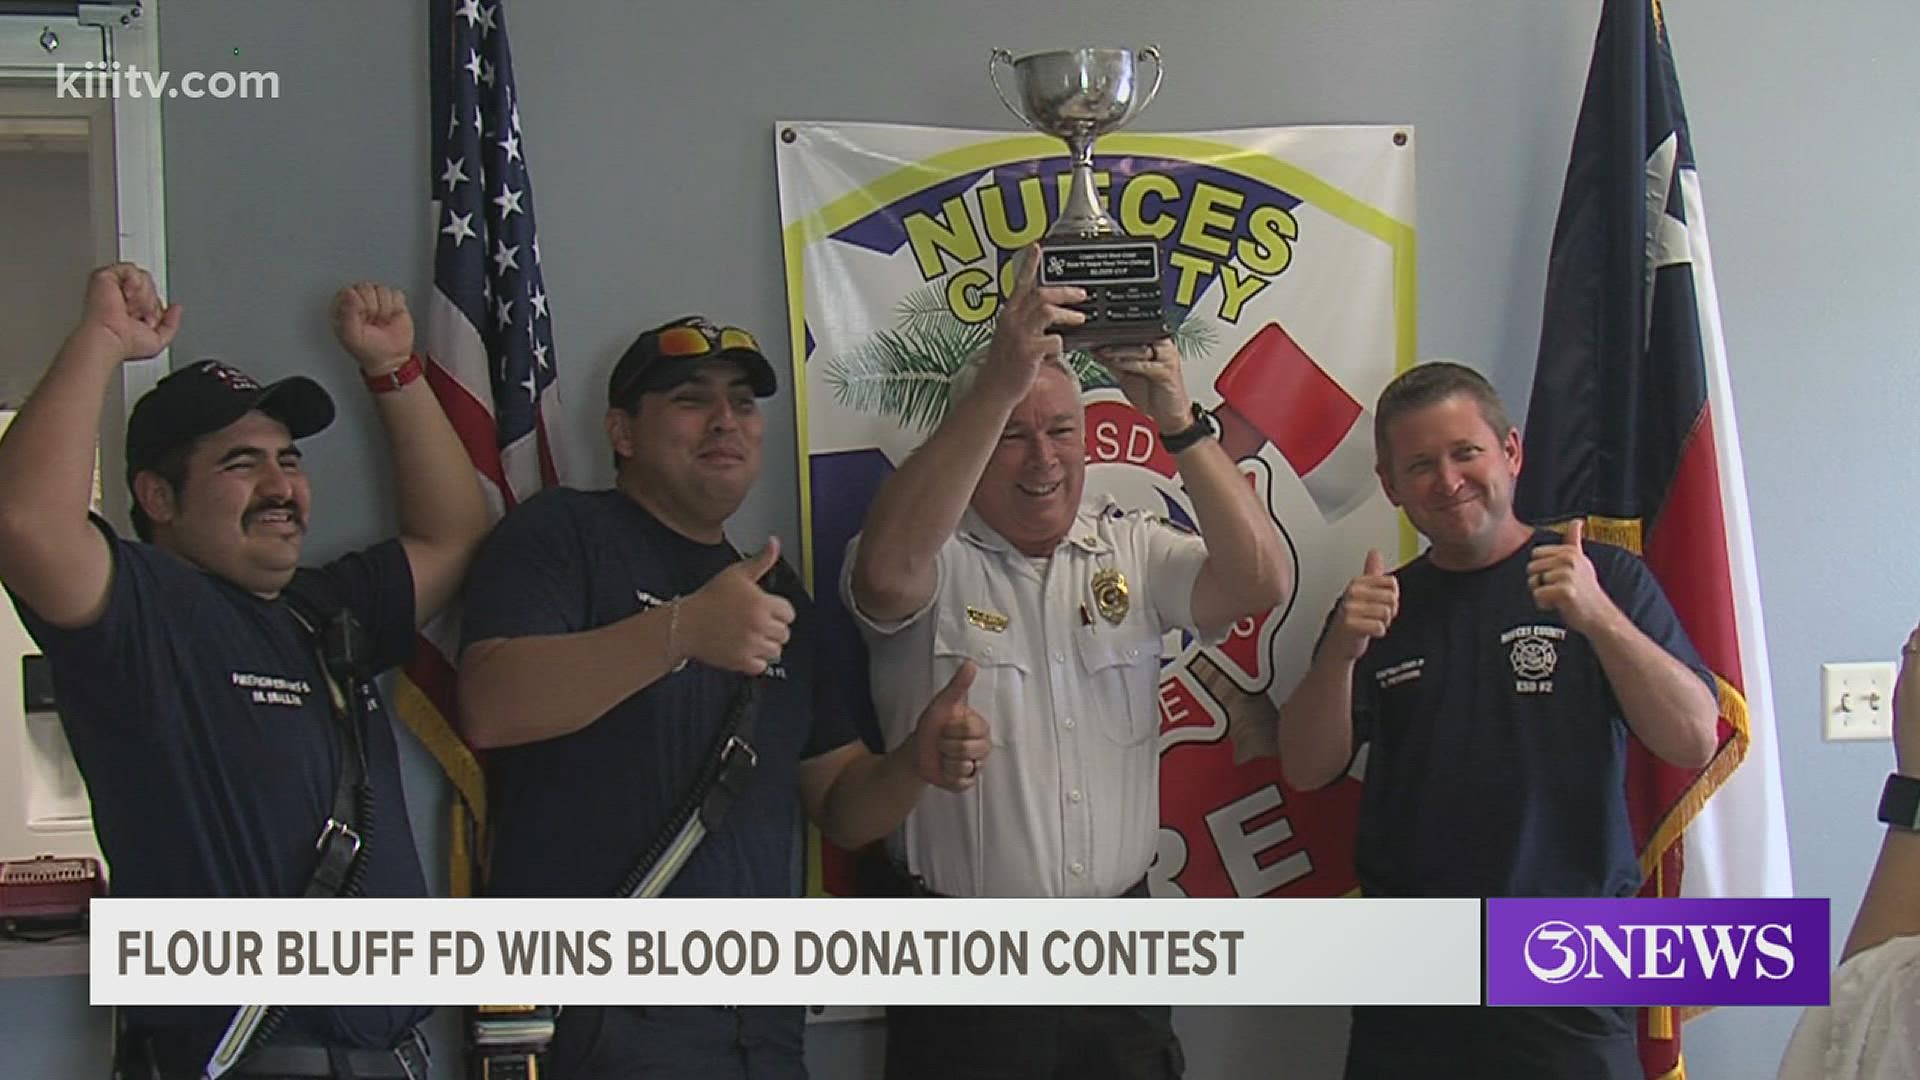 The department donated 30 units of blood at a single donation event. It was also their first time competing in the contest.